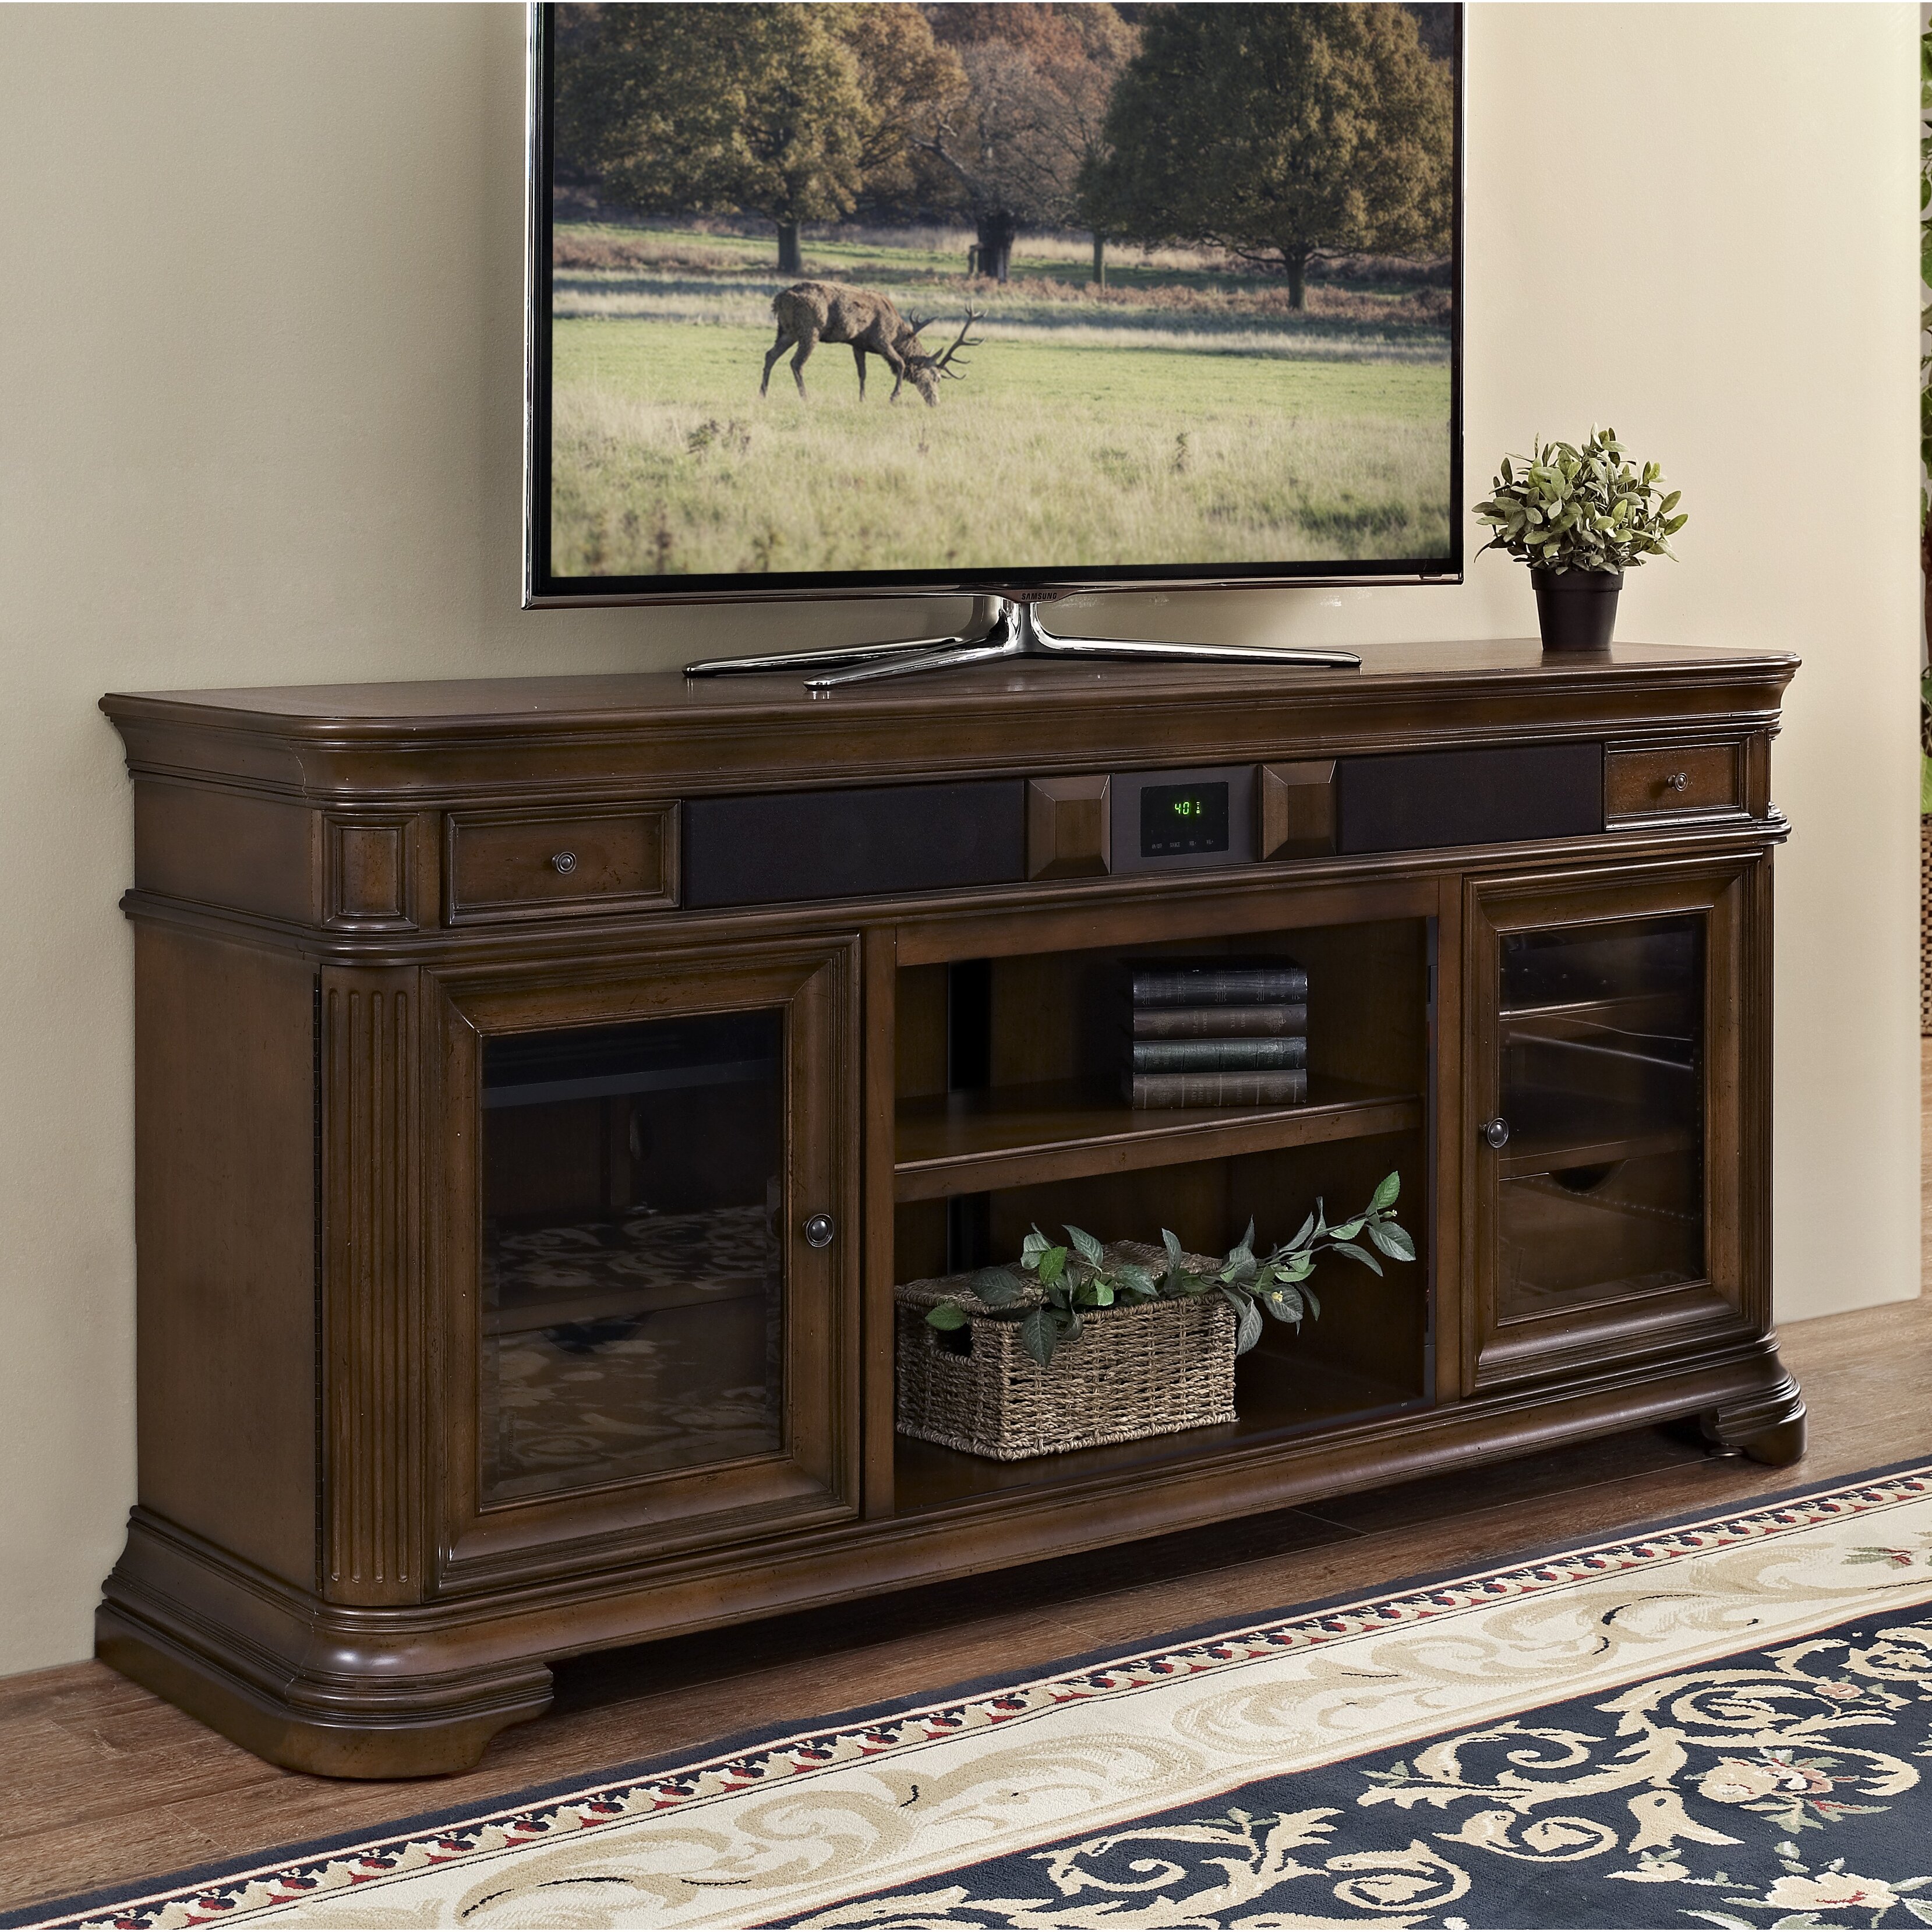 Turnkey LLC Lexington 66" Deluxe TV Stand with Built-In ...